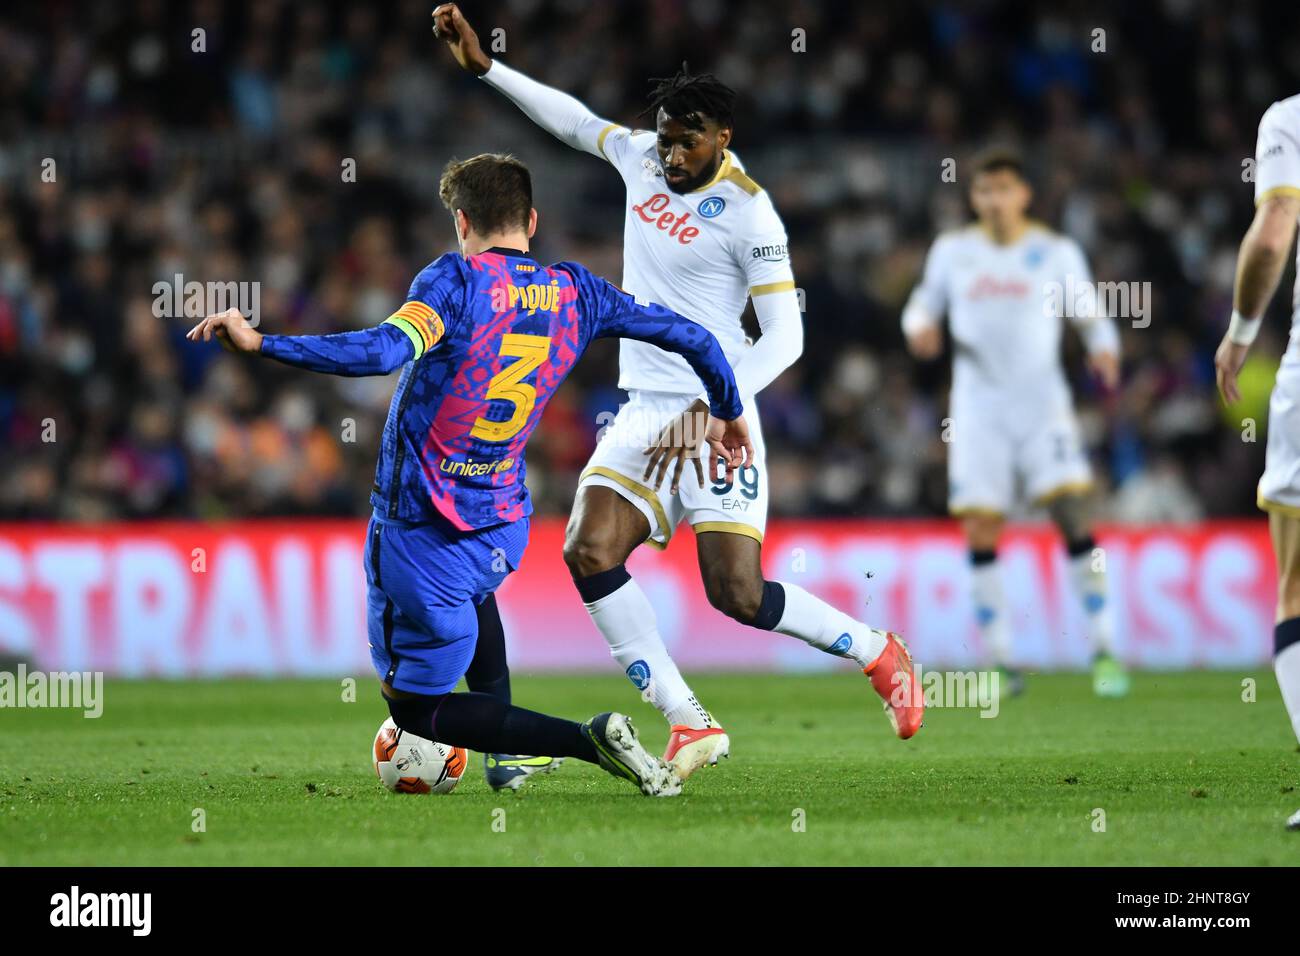 Barcelona,Spain.17 February,2022.  Gerard Pique (3) of FC Barcelona challenges (99) André-Frank Zambo Anguissa of Napoli during the Europa League match between FC Barcelona and SSC Napoli at Camp Nou Stadium. Credit: rosdemora/Alamy Live News Stock Photo